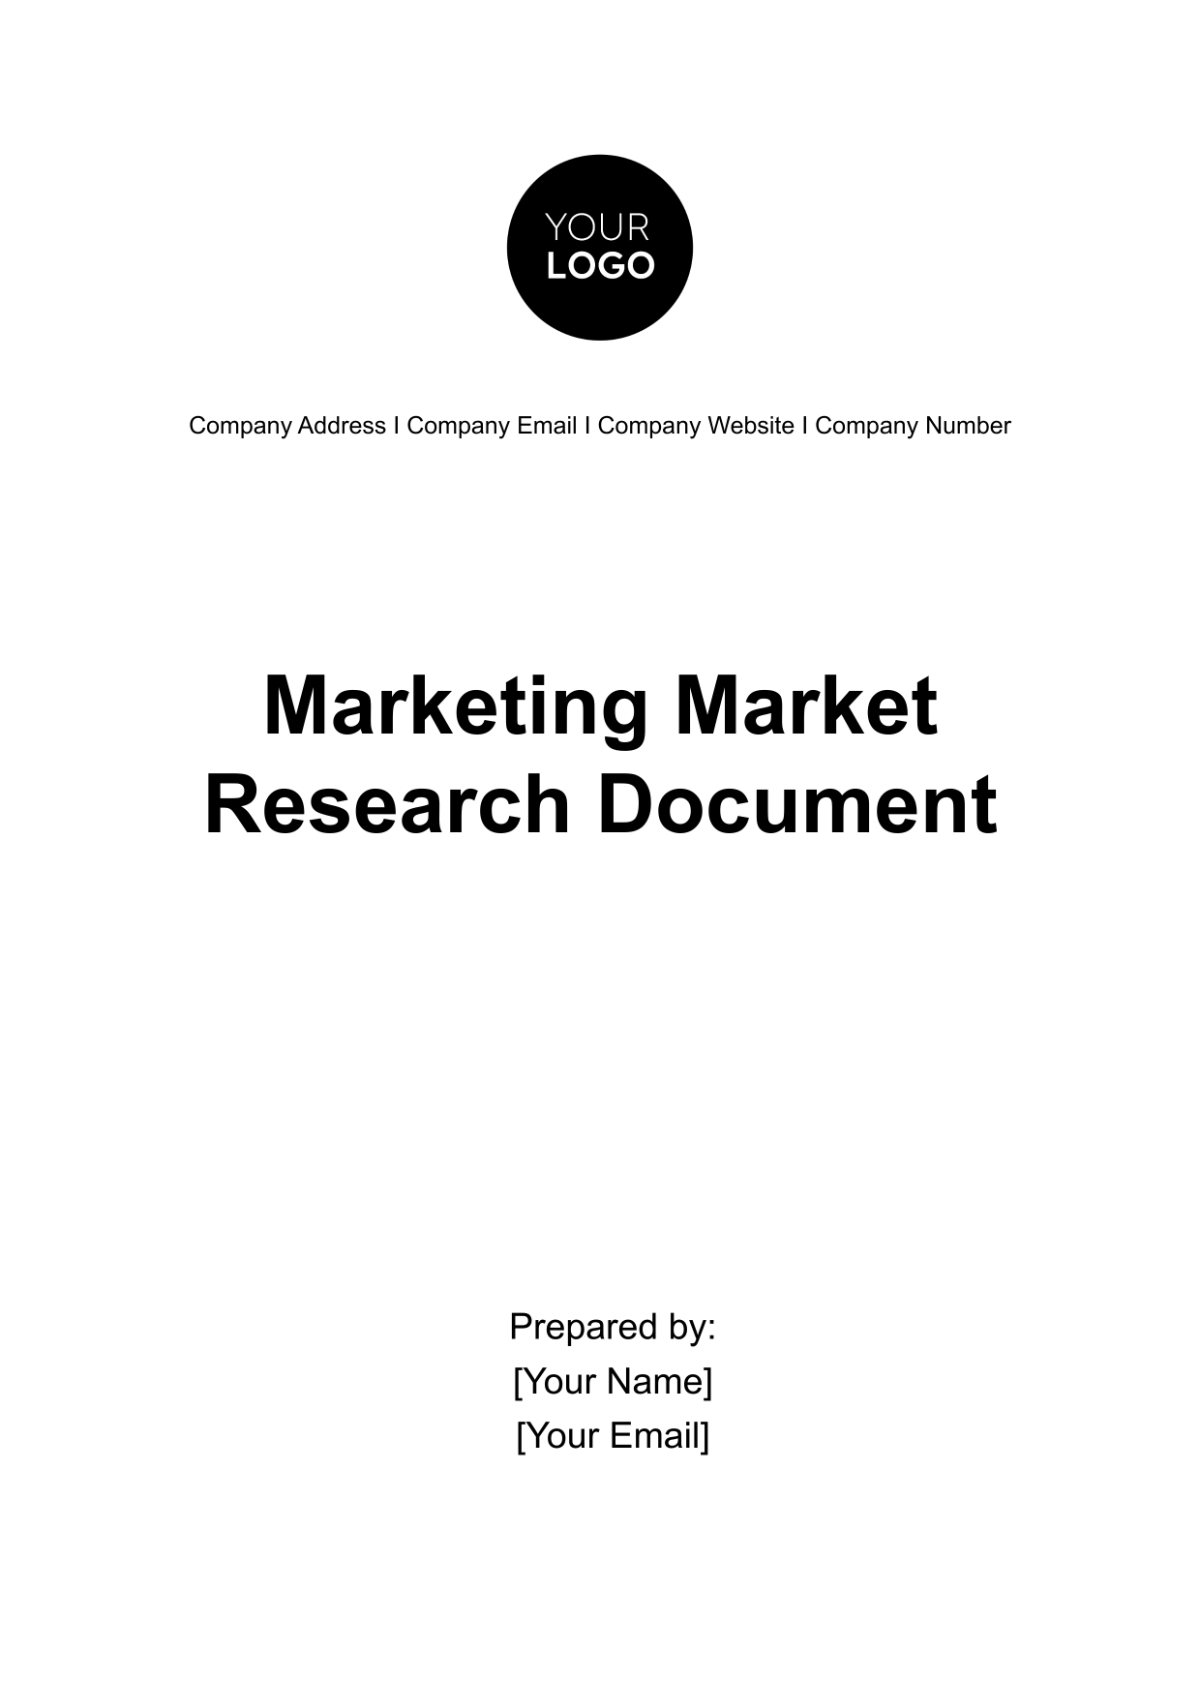 Marketing Market Research Document Template